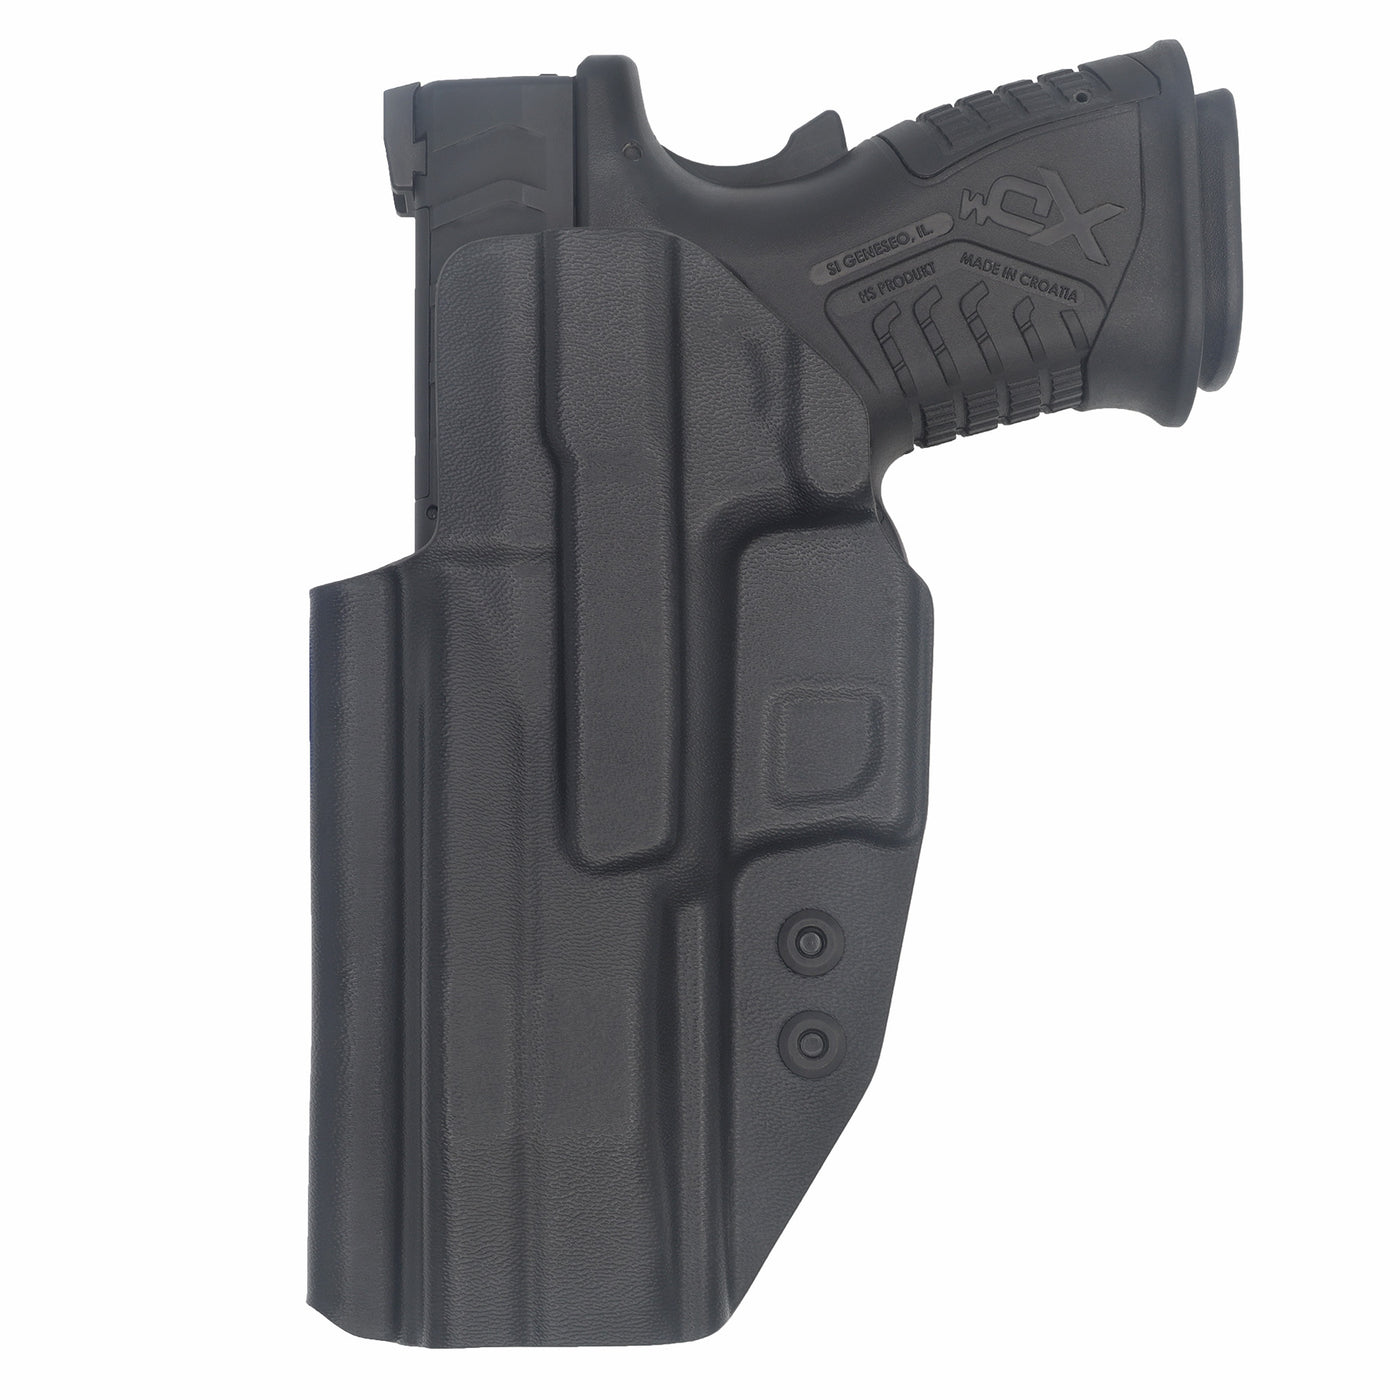 This is the rear of the C&G Holsters Inside the waistband Covert series holster for the Springfield XDm Elite OSP Dragonfly 4.25" in right hand and black. It also shows the red dot cut out using a Trijicon RMR.